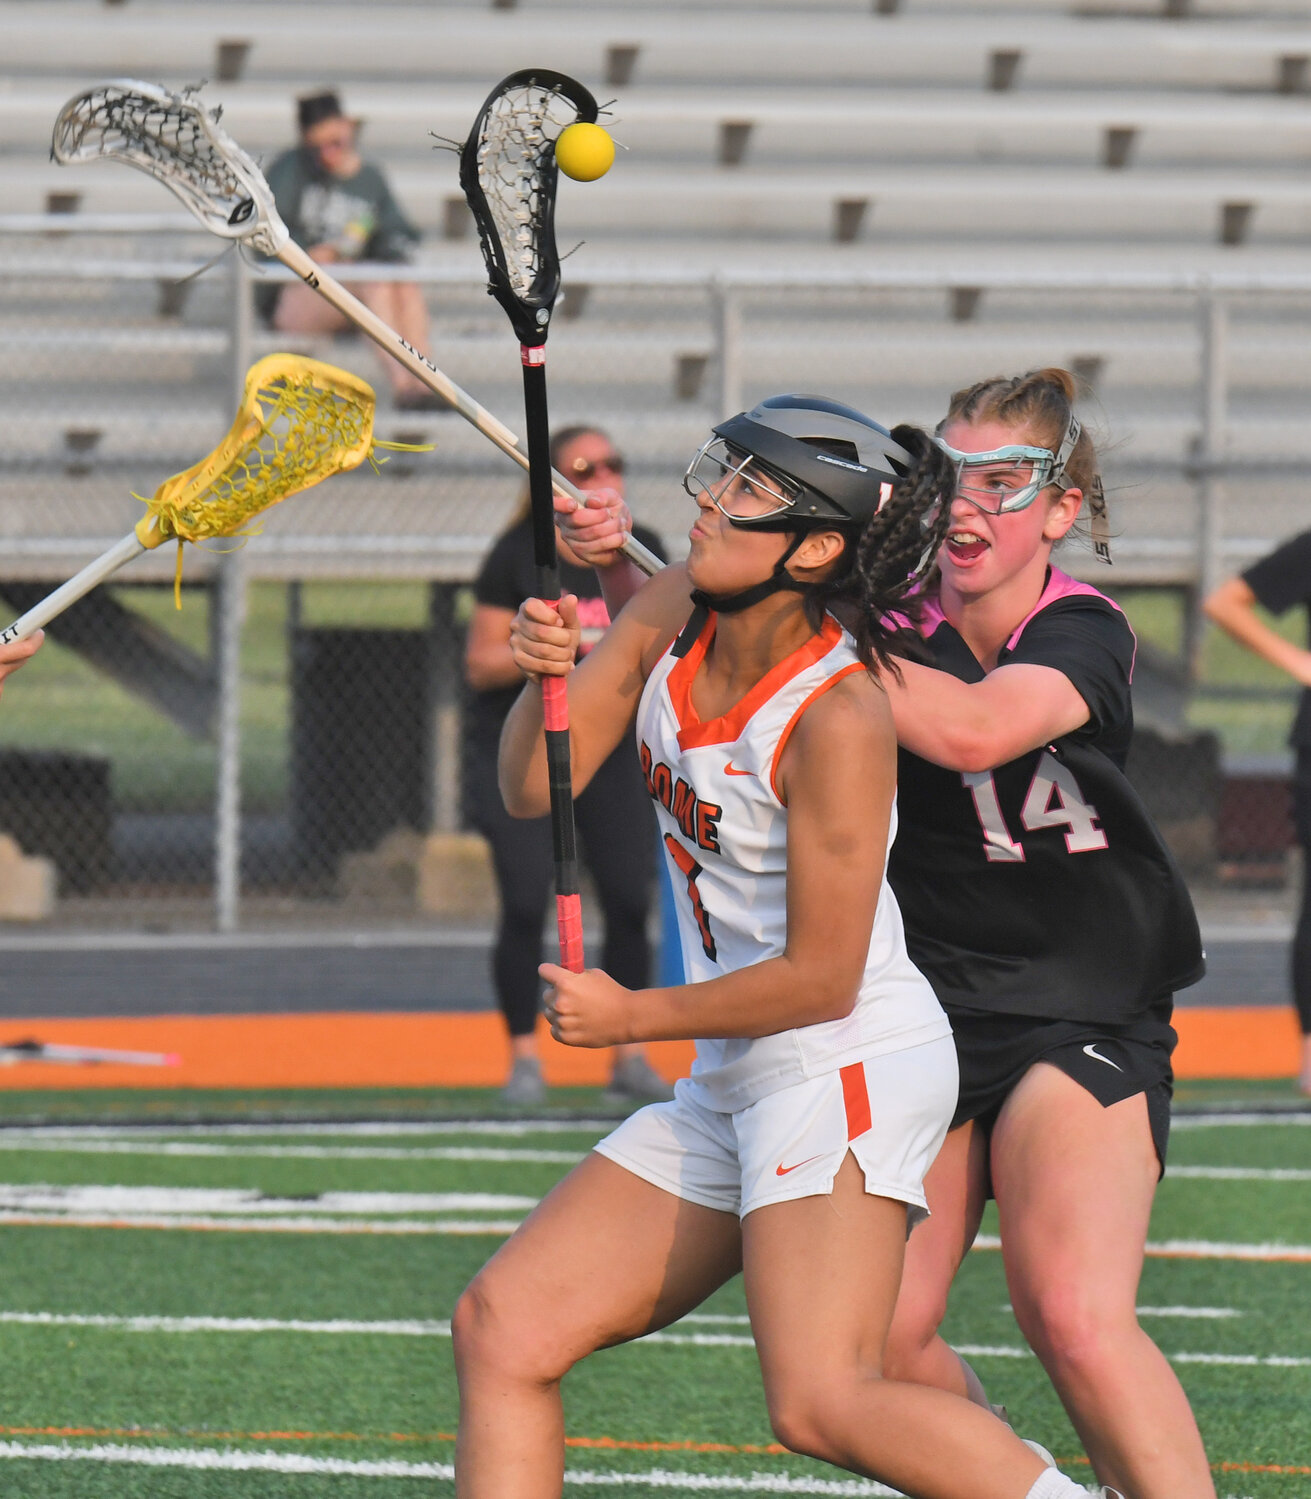 Danielle D'Aiuto of Rome Free Academy tries to maintain possession as she's defended by Syracuse's Abigail Delaney Tuesday night. D'Aiuto scored and the Black Knights won 12-2 at RFA Stadium in the quarterfinals of the Section III Class A postseason.